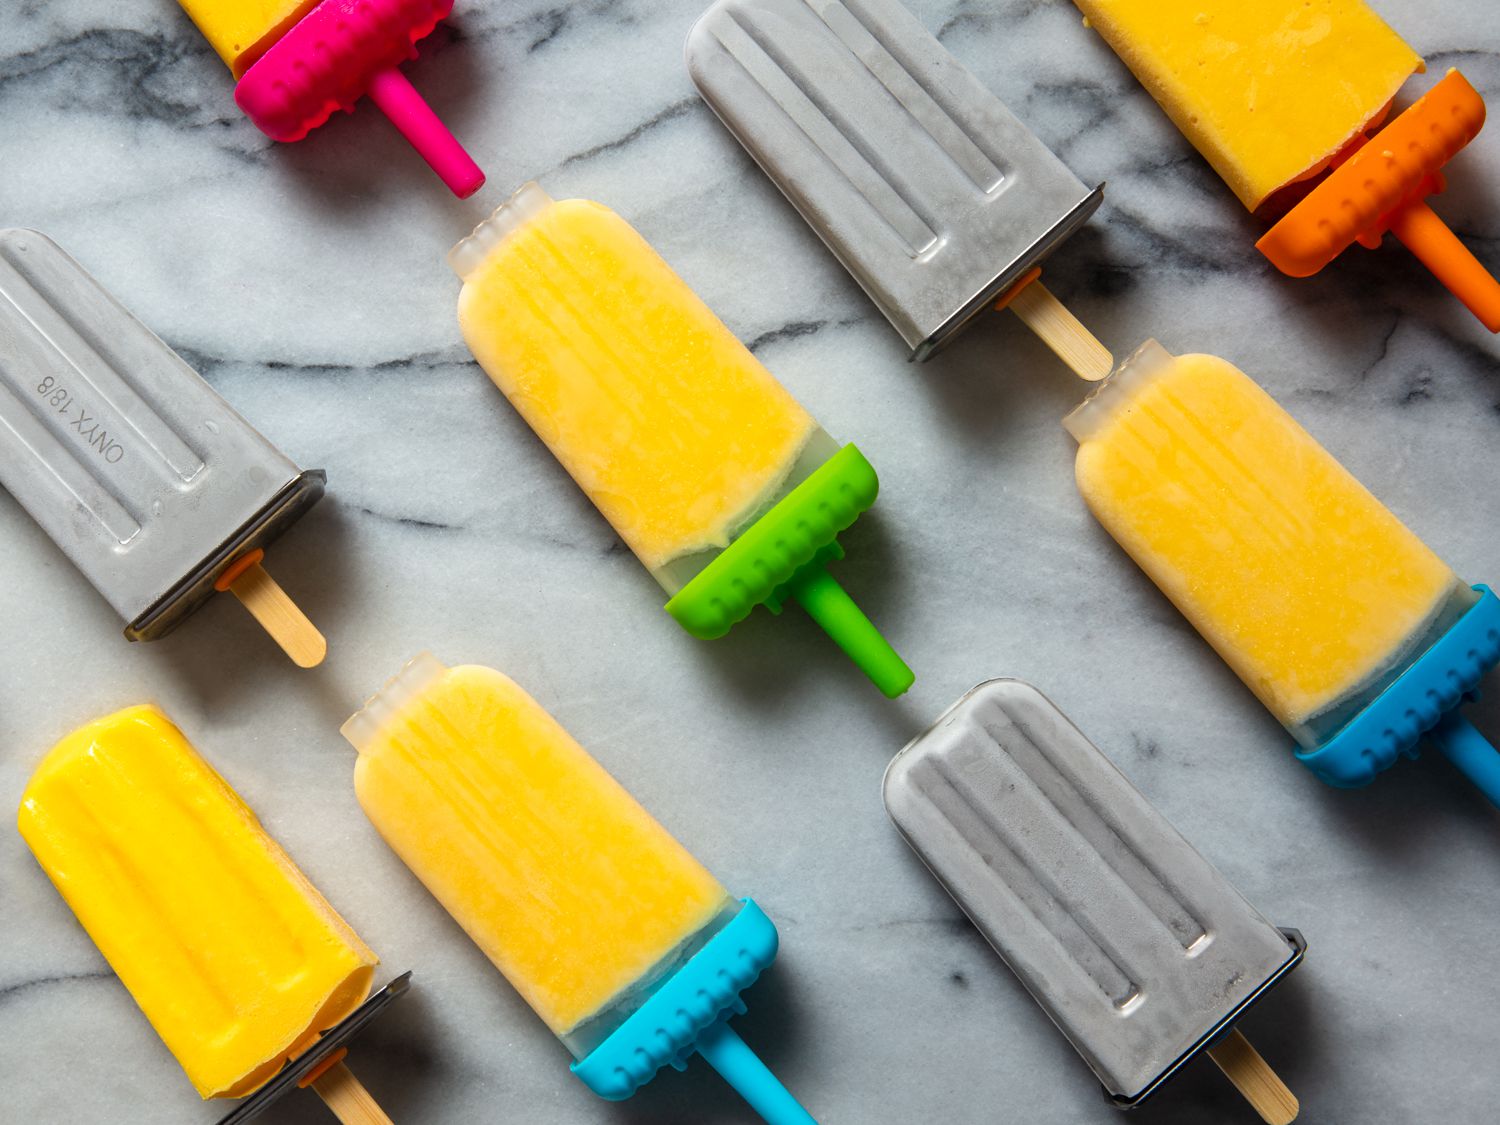 We Tested Popsicle Molds to Find the Best Ones for Icy Treats